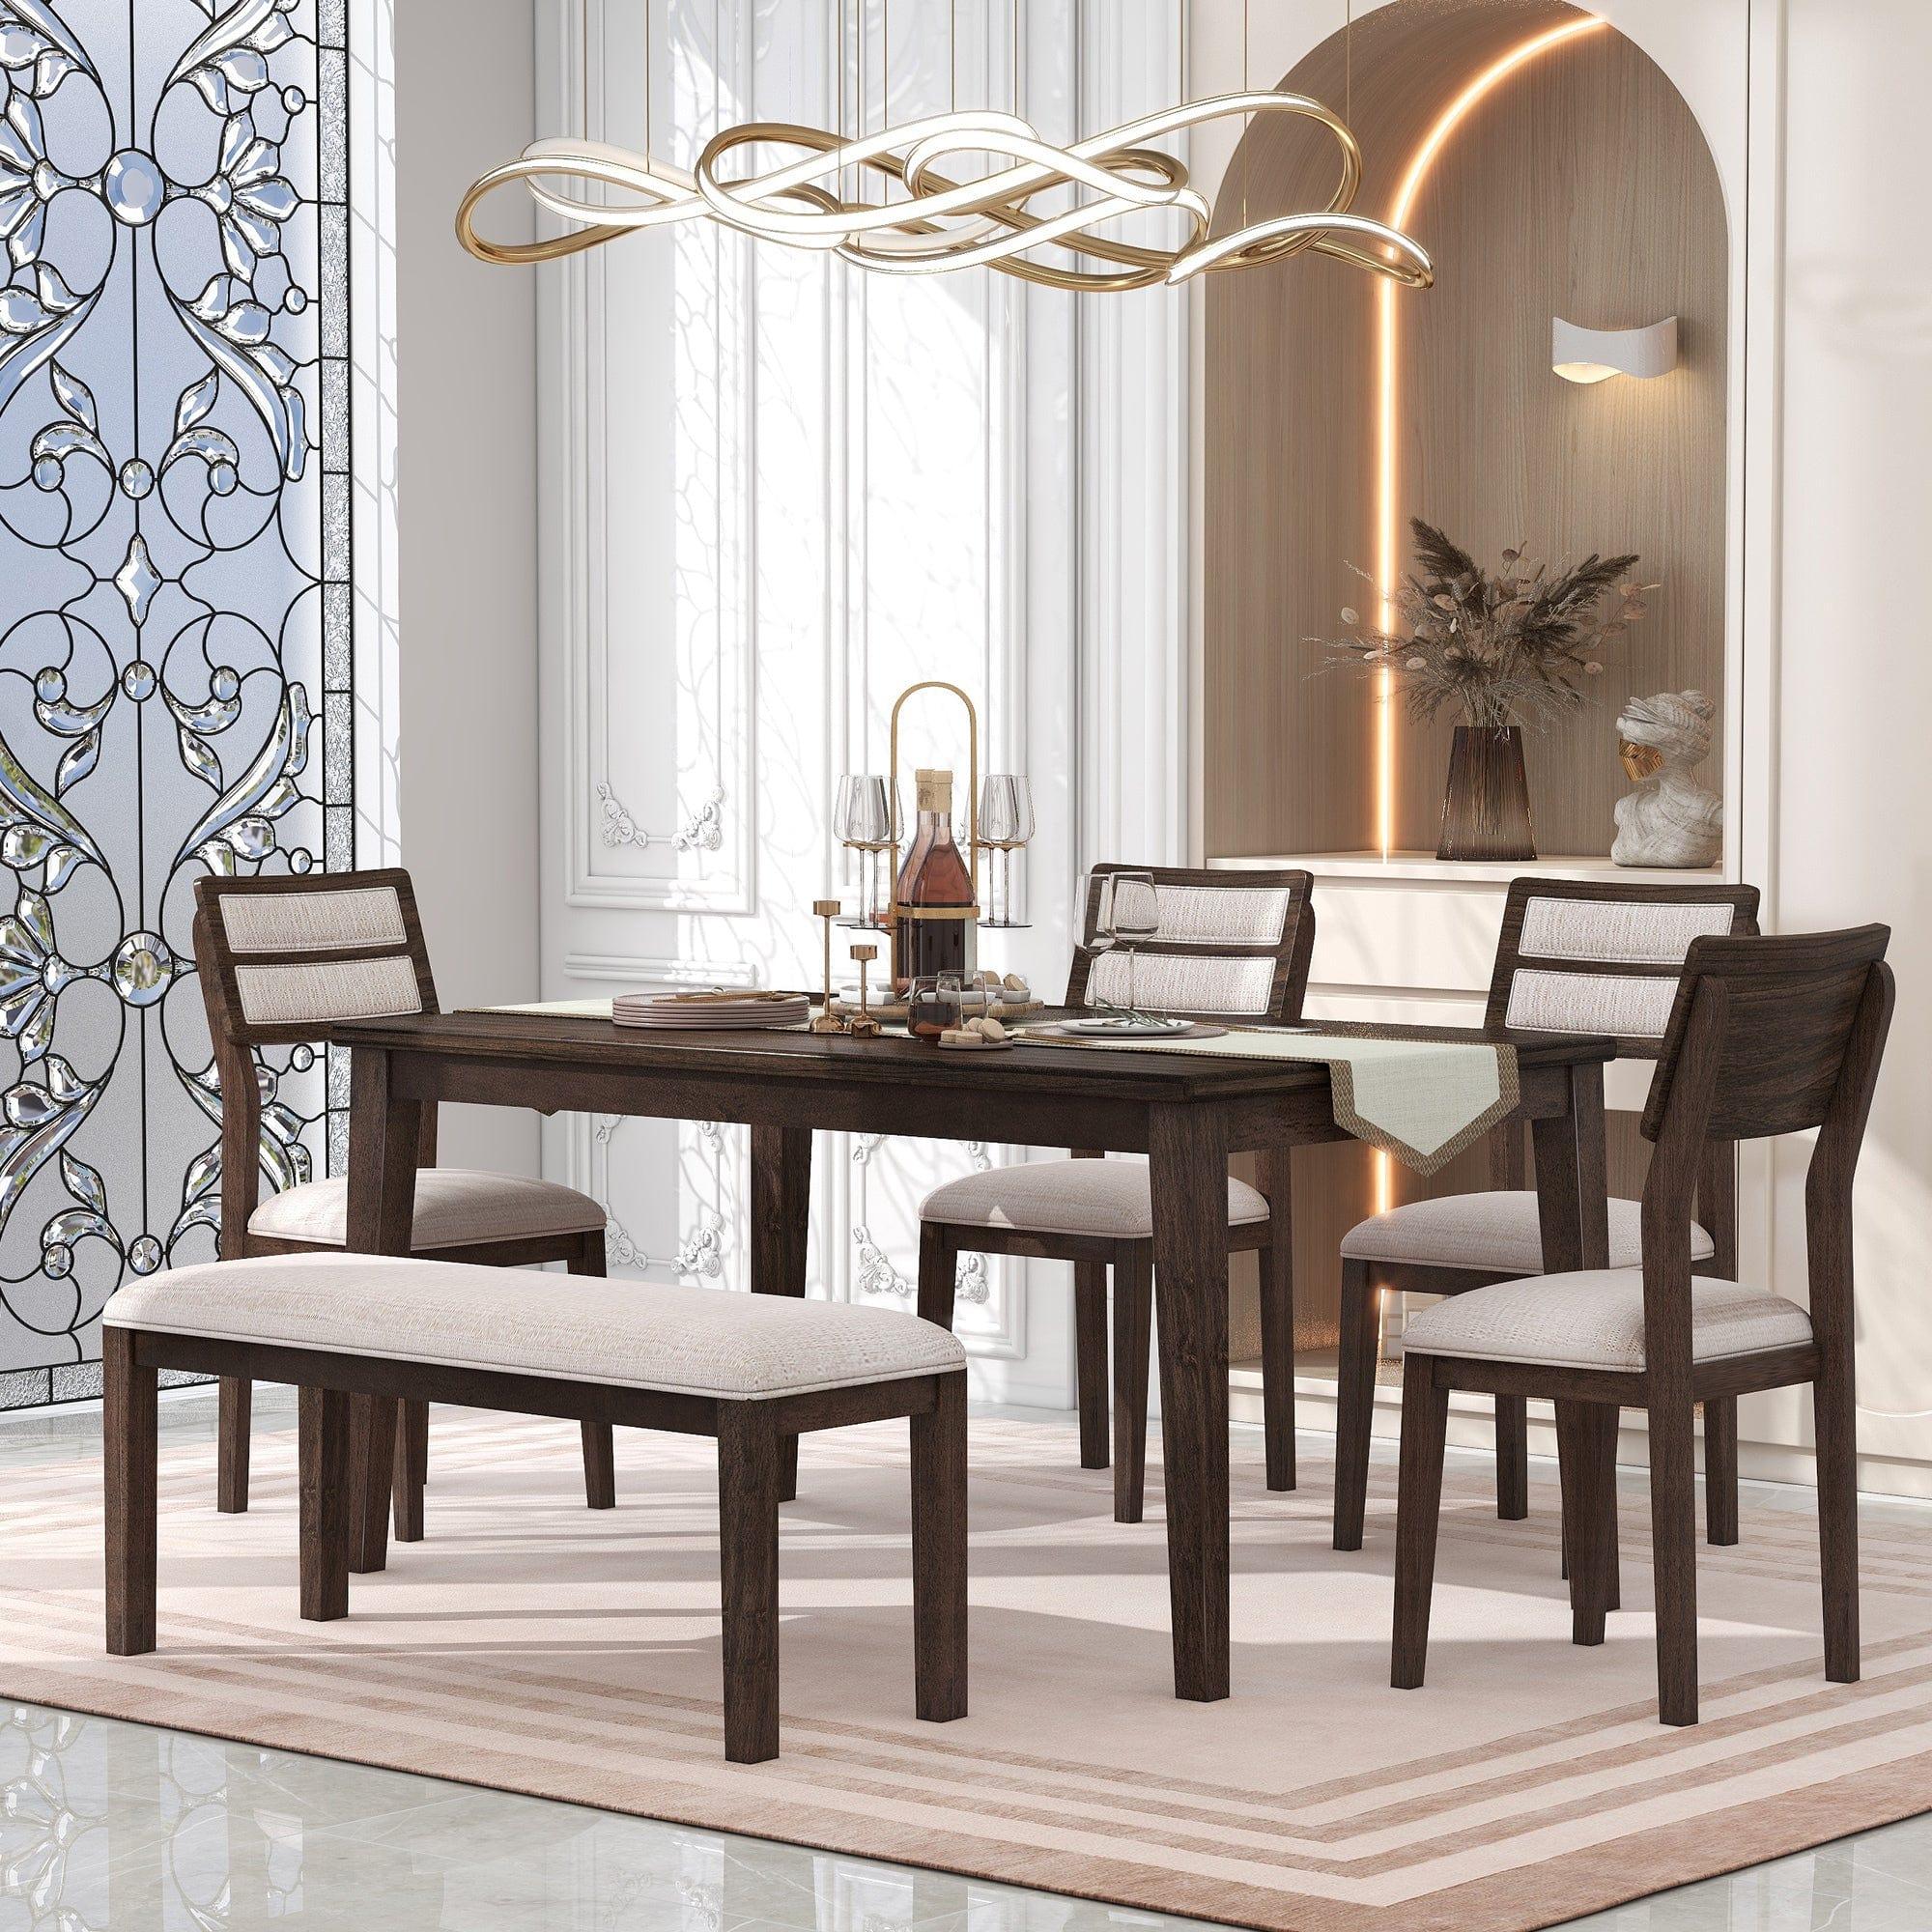 Shop TREXM Classic and Traditional Style 6 - Piece Dining Set, Includes Dining Table, 4 Upholstered Chairs & Bench (Espresso) Mademoiselle Home Decor